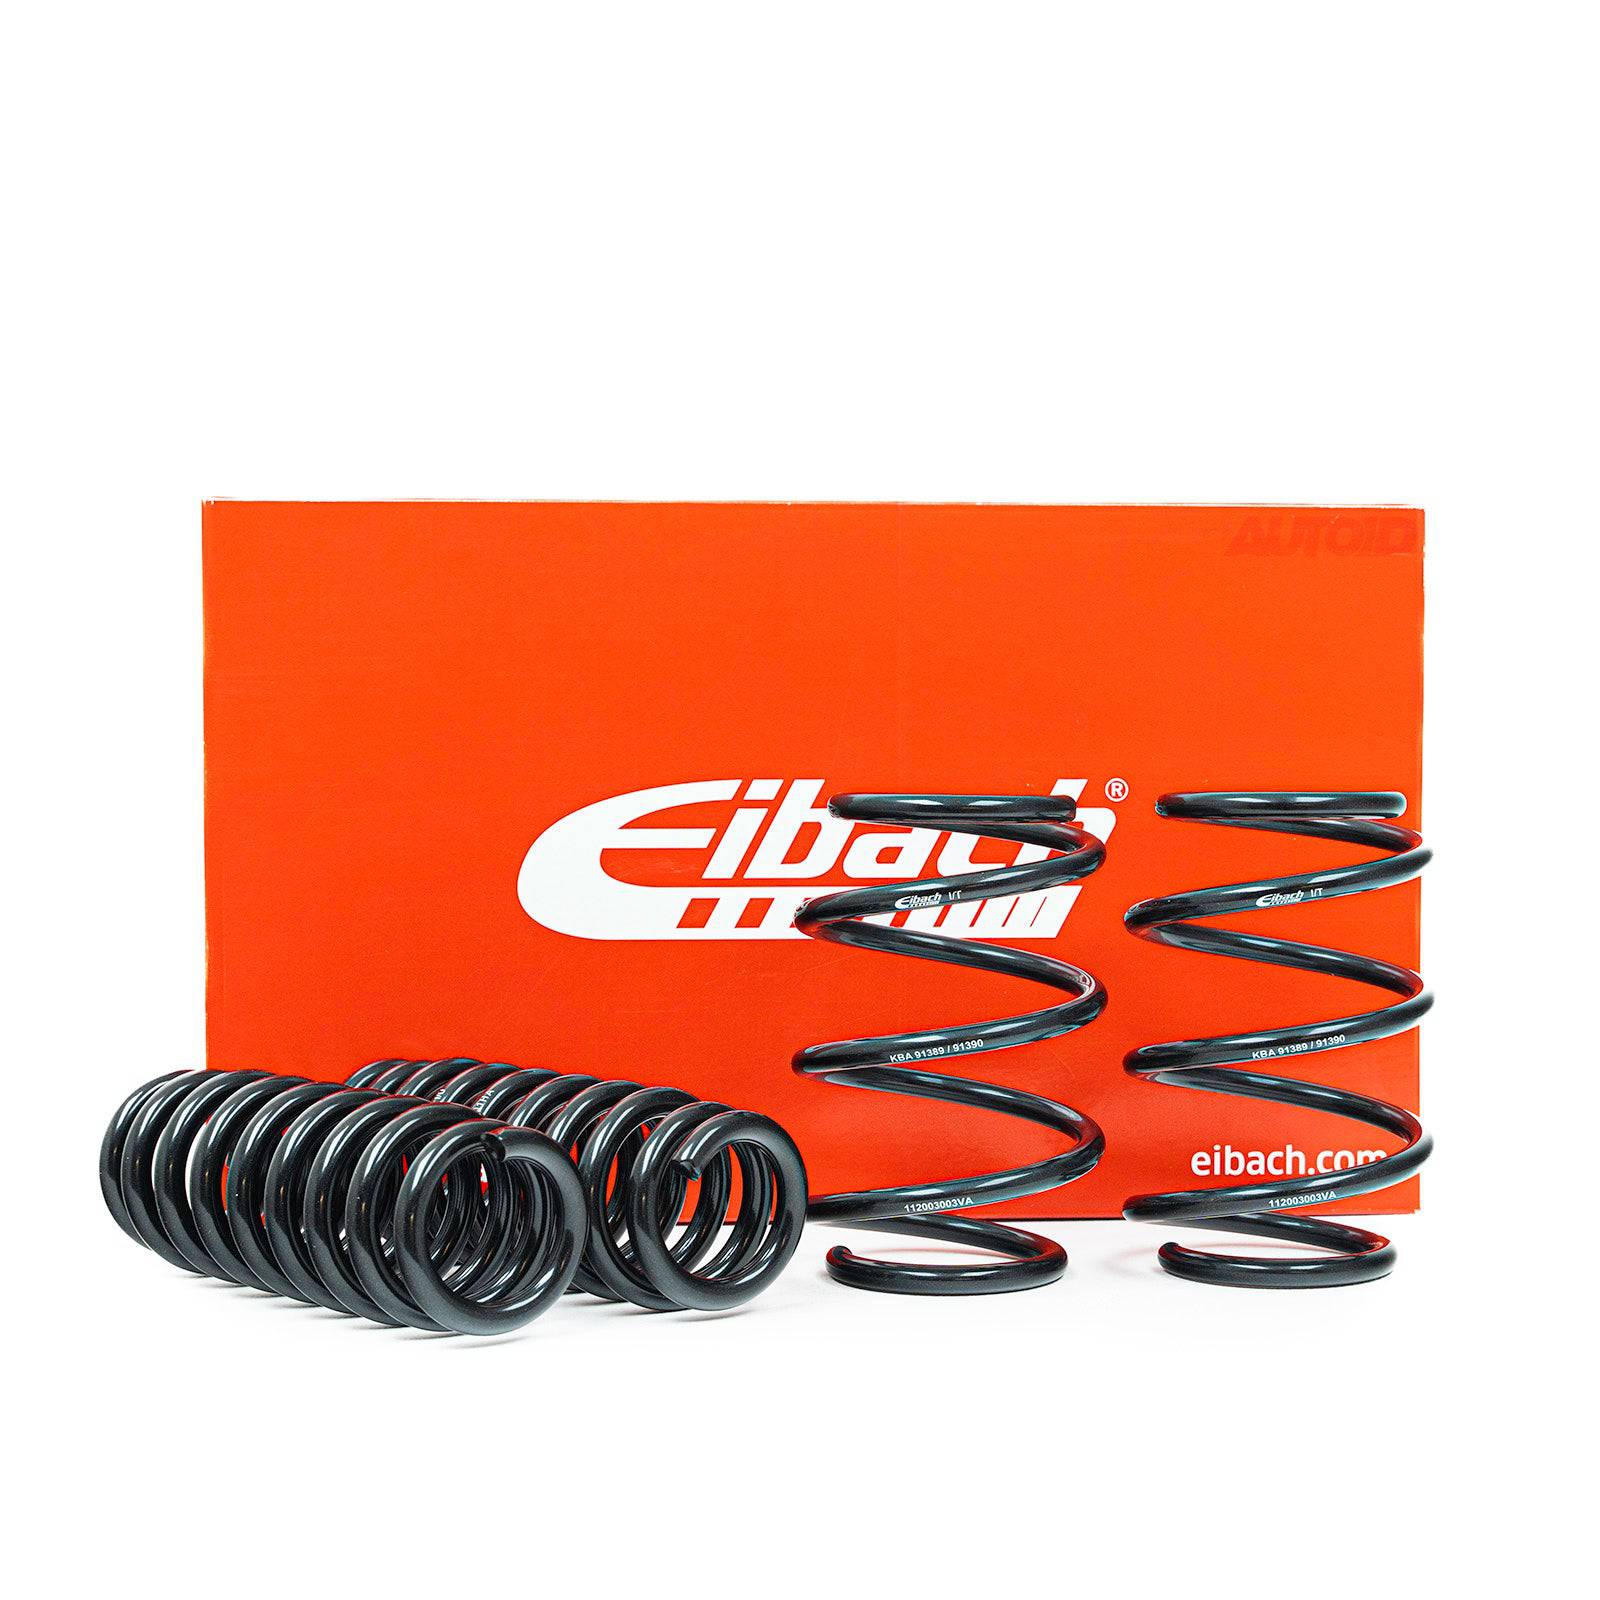 Eibach Pro-Kit Performance Spring Kit for Audi A3, S3 & RS3 (2012-2020, 8V), Lowering Springs, Eibach - AUTOID | Premium Automotive Accessories